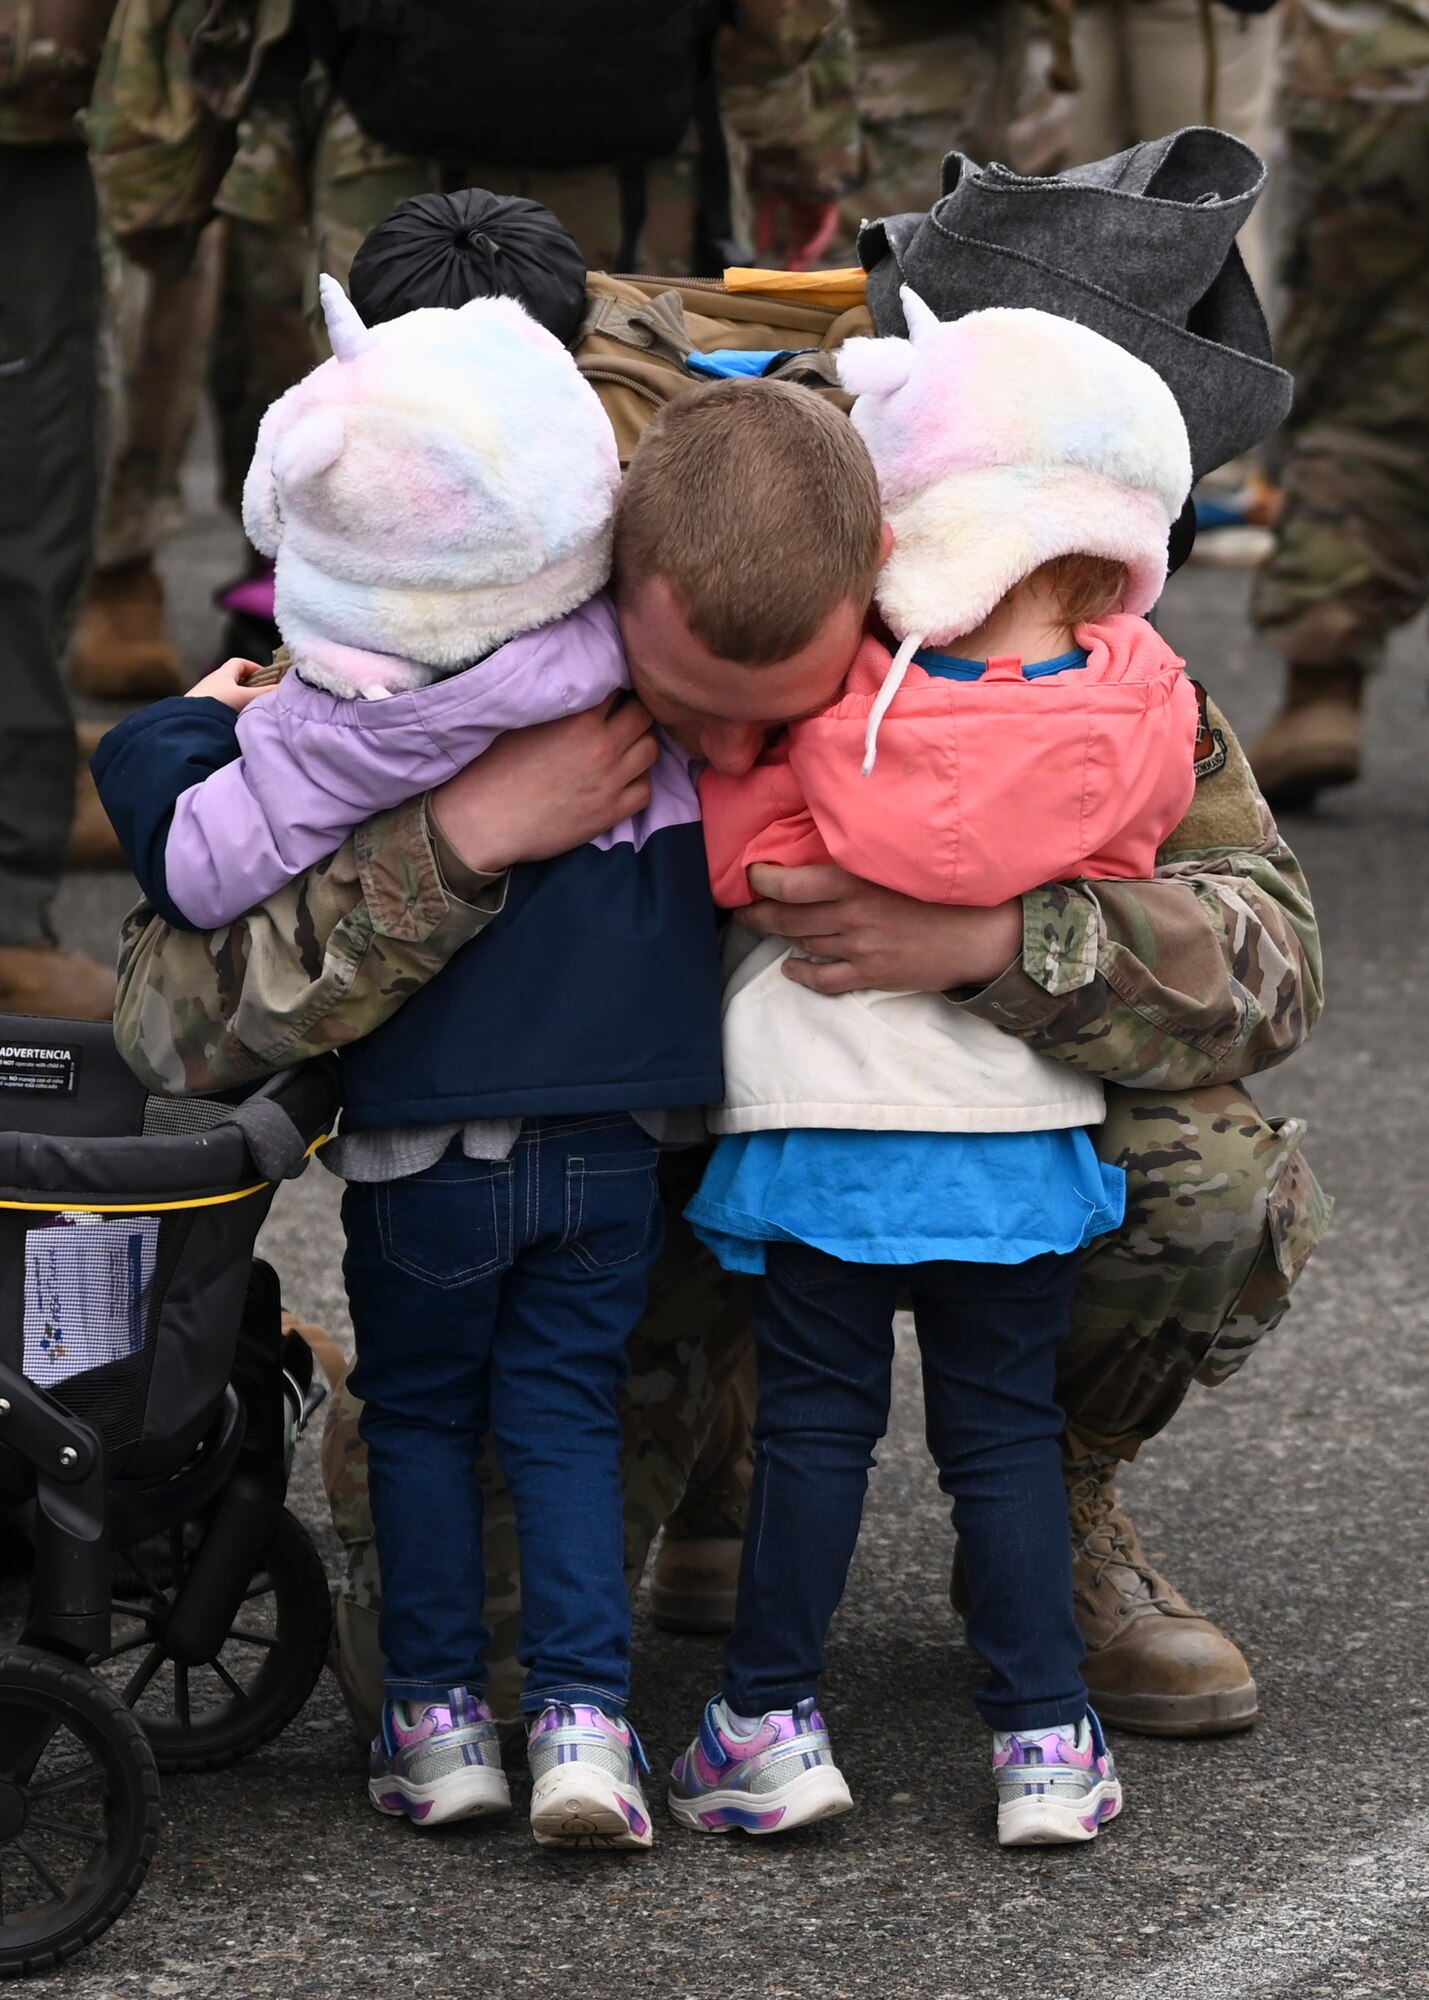 A U.S. Airman with the 62d Airlift Wing is welcomed home from a deployment by loved ones at Joint Base Lewis-McChord, Washington, April 4, 2023. This deployment was the 62d Airlift Wing’s first under the new Air Force Force Generation Model in support of U.S. Central Command, U.S. European Command and U.S. Africa Command operations. The new AFFORGEN model aims to reconstitute Air Mobility Command’s manpower, aircraft and equipment into force elements that train, deploy and recover as cohesive units throughout each phase of the cycle. (U.S. Air Force photo by Senior Airman Callie Norton)